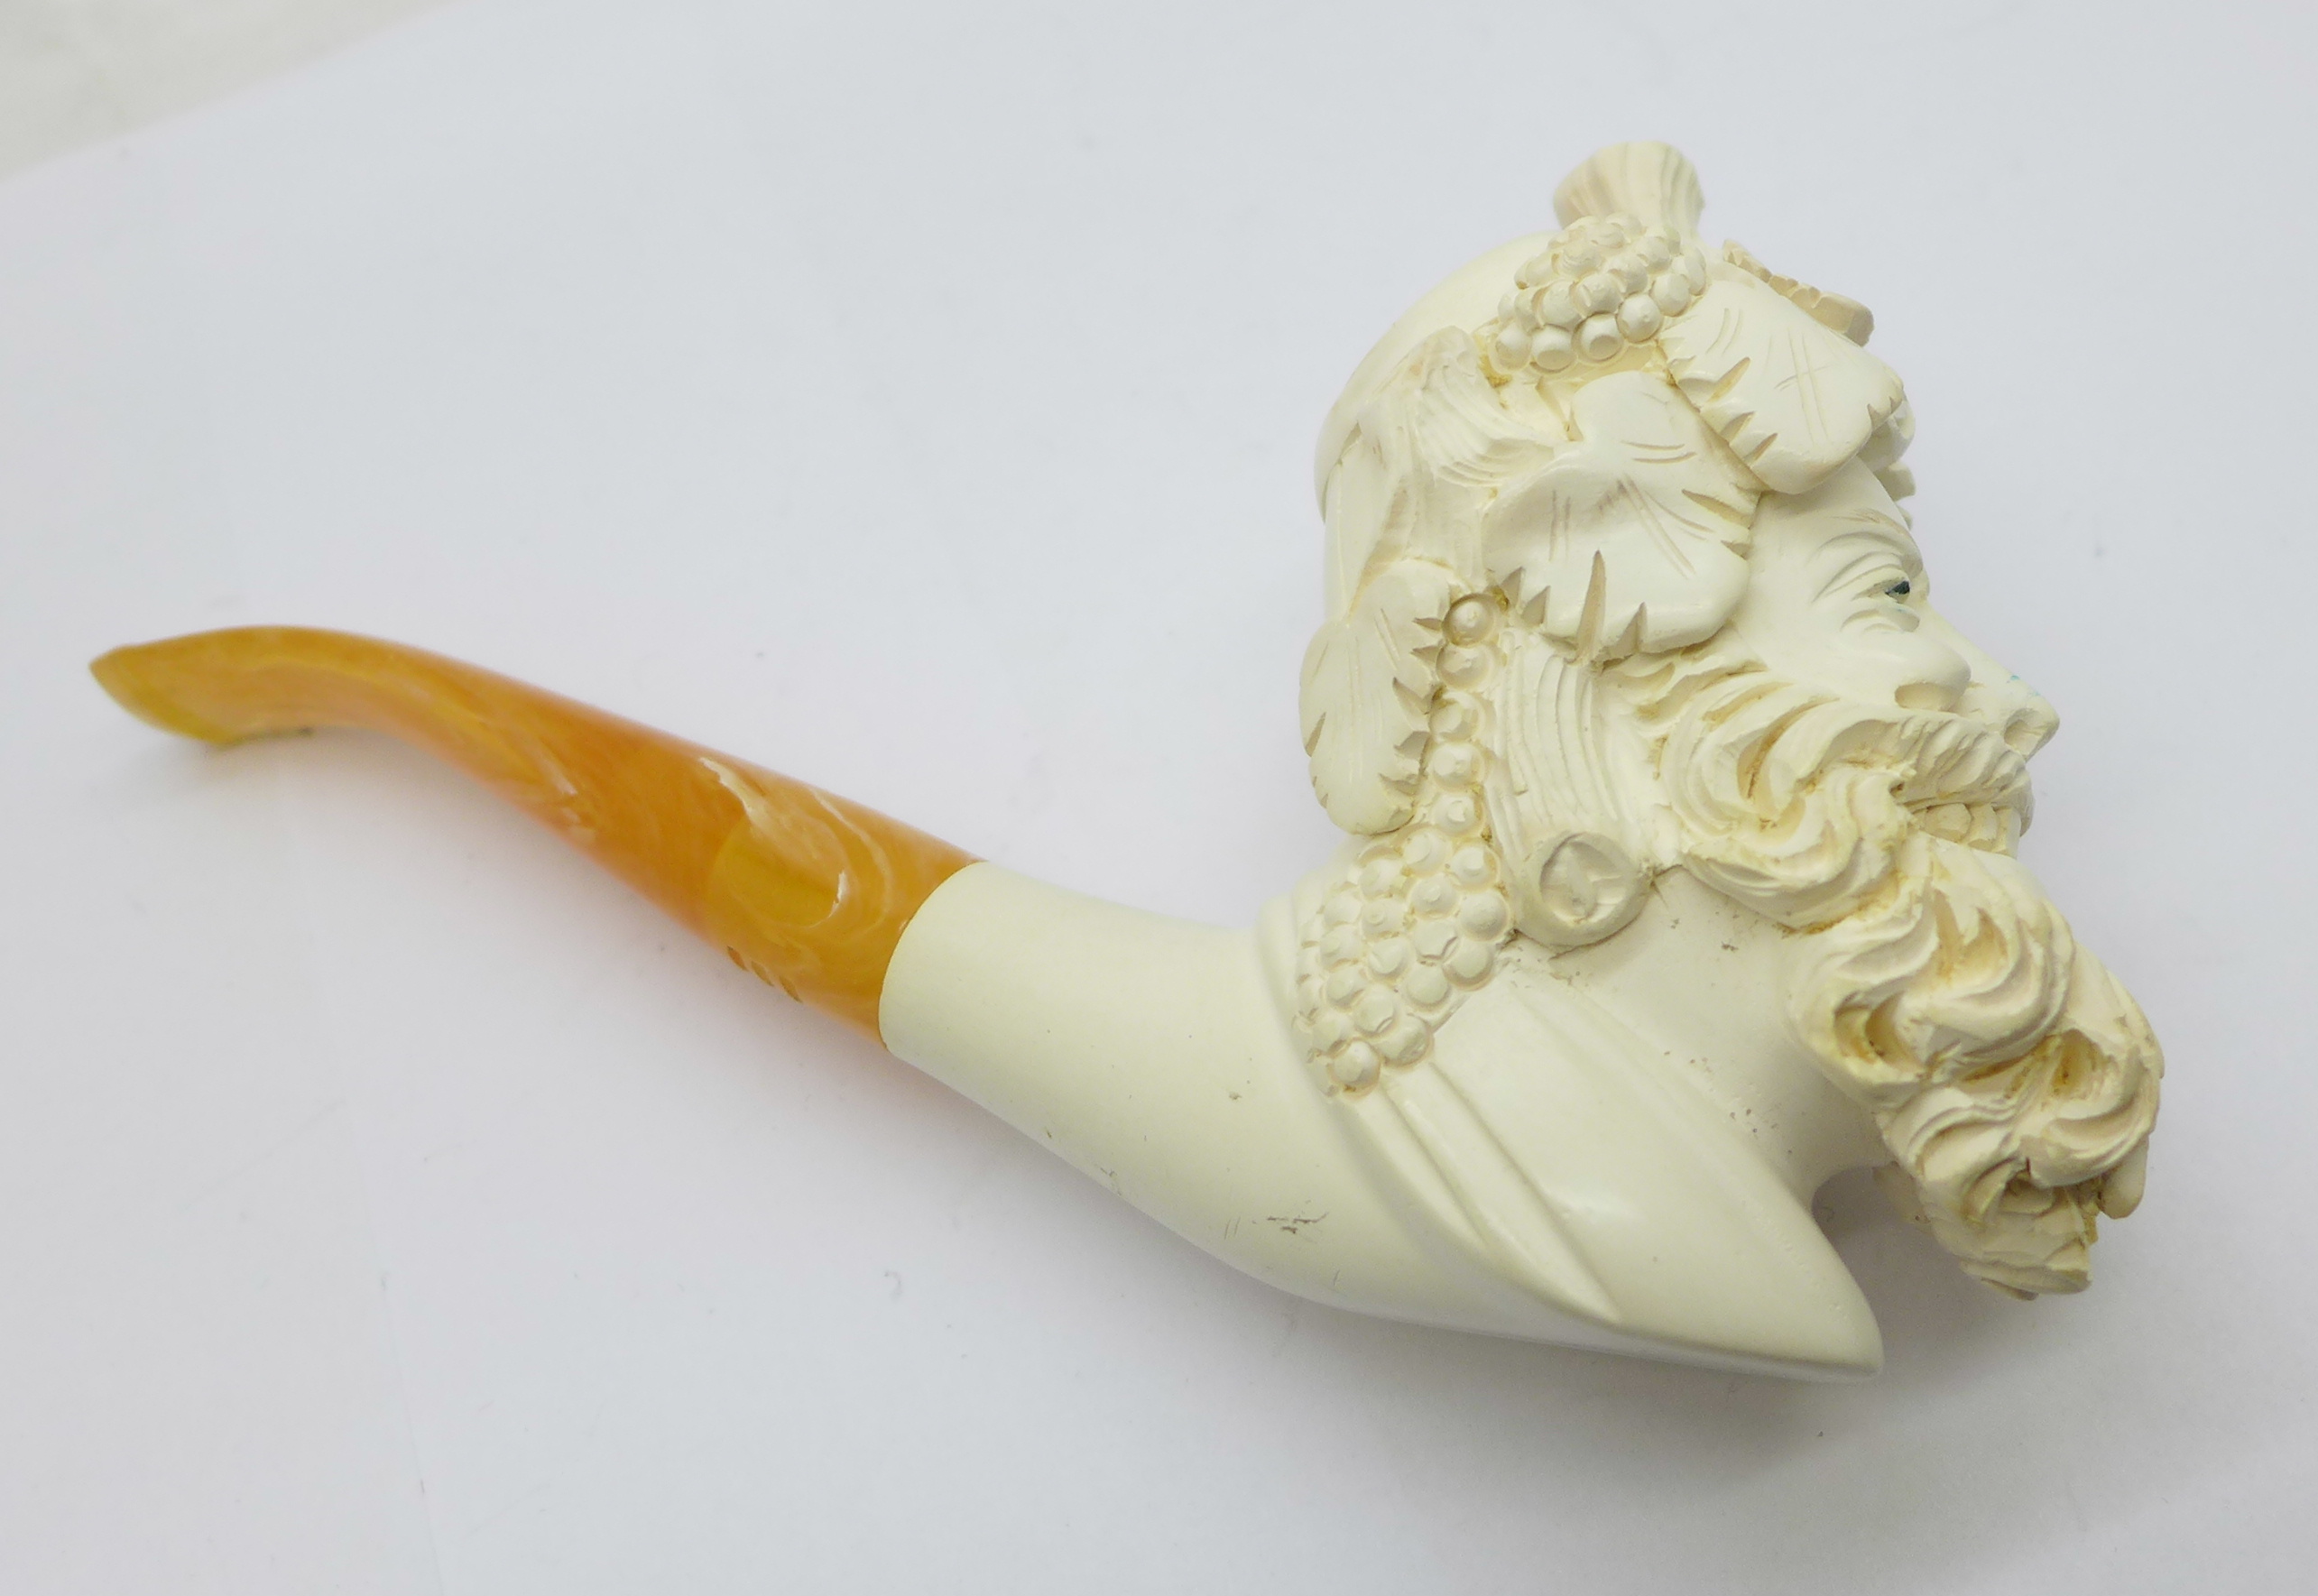 A cased Meerschaum pipe - Image 3 of 3